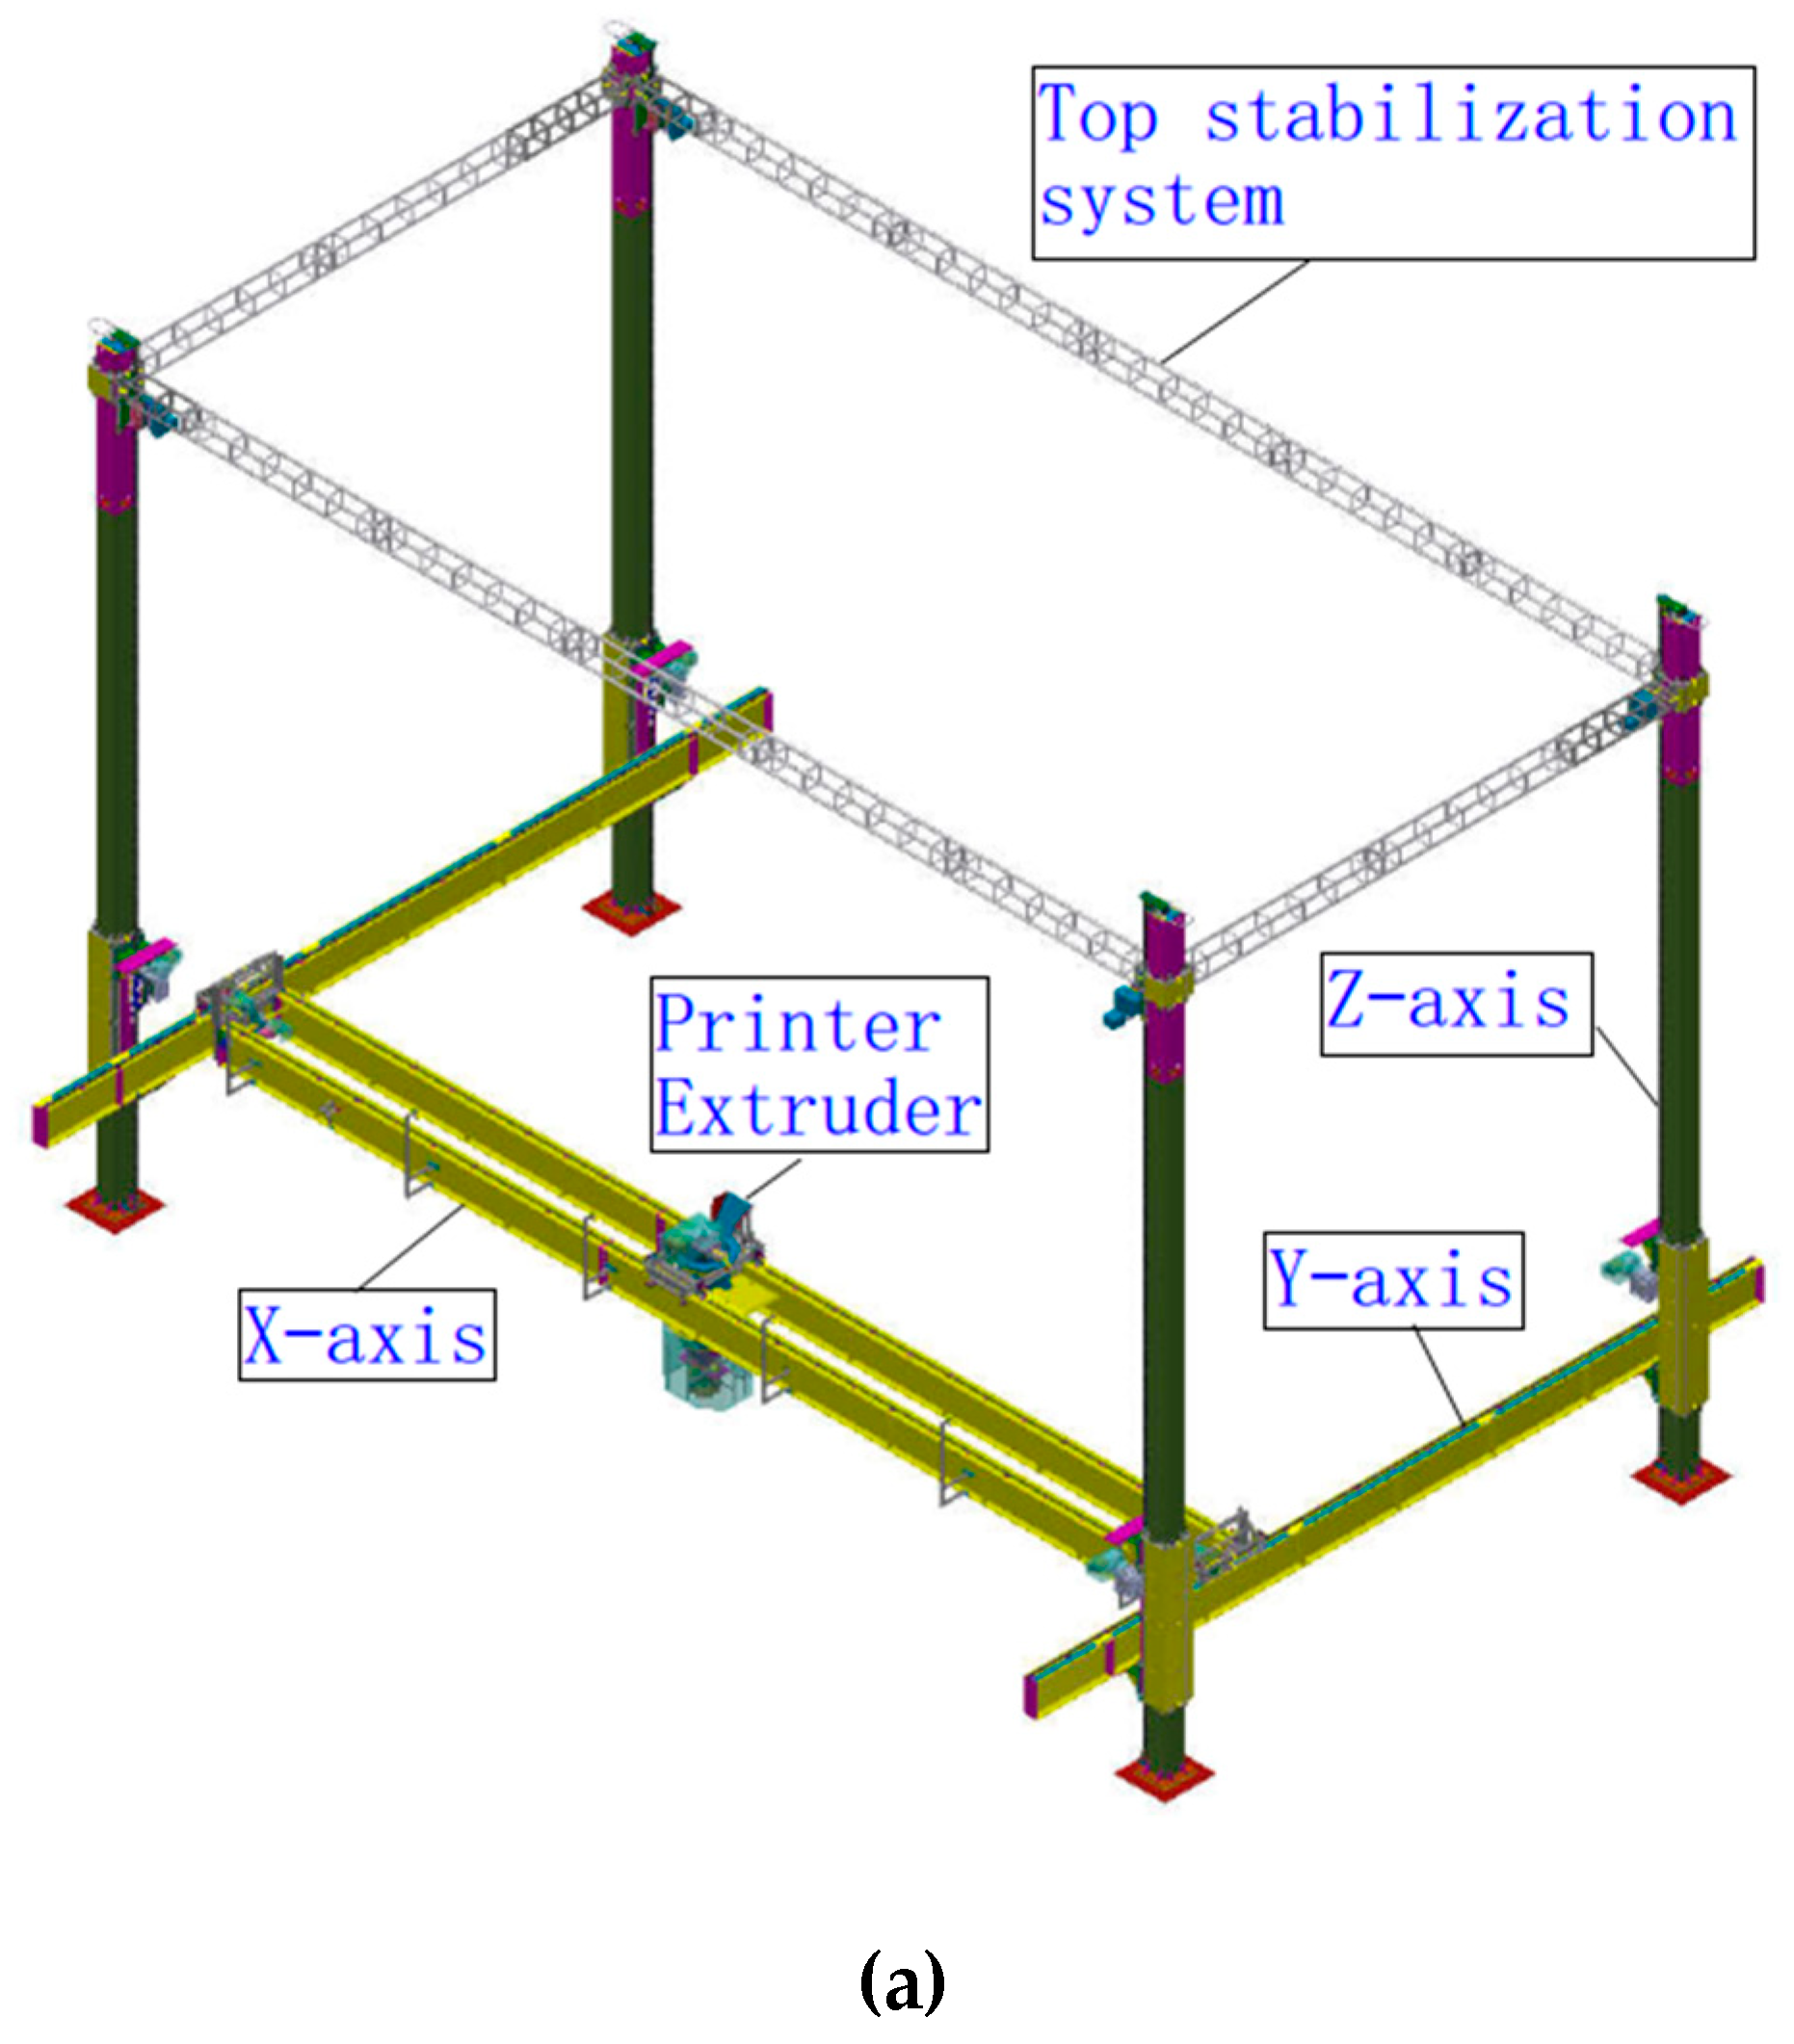 When start a print the z axis goes up indefinately after homing